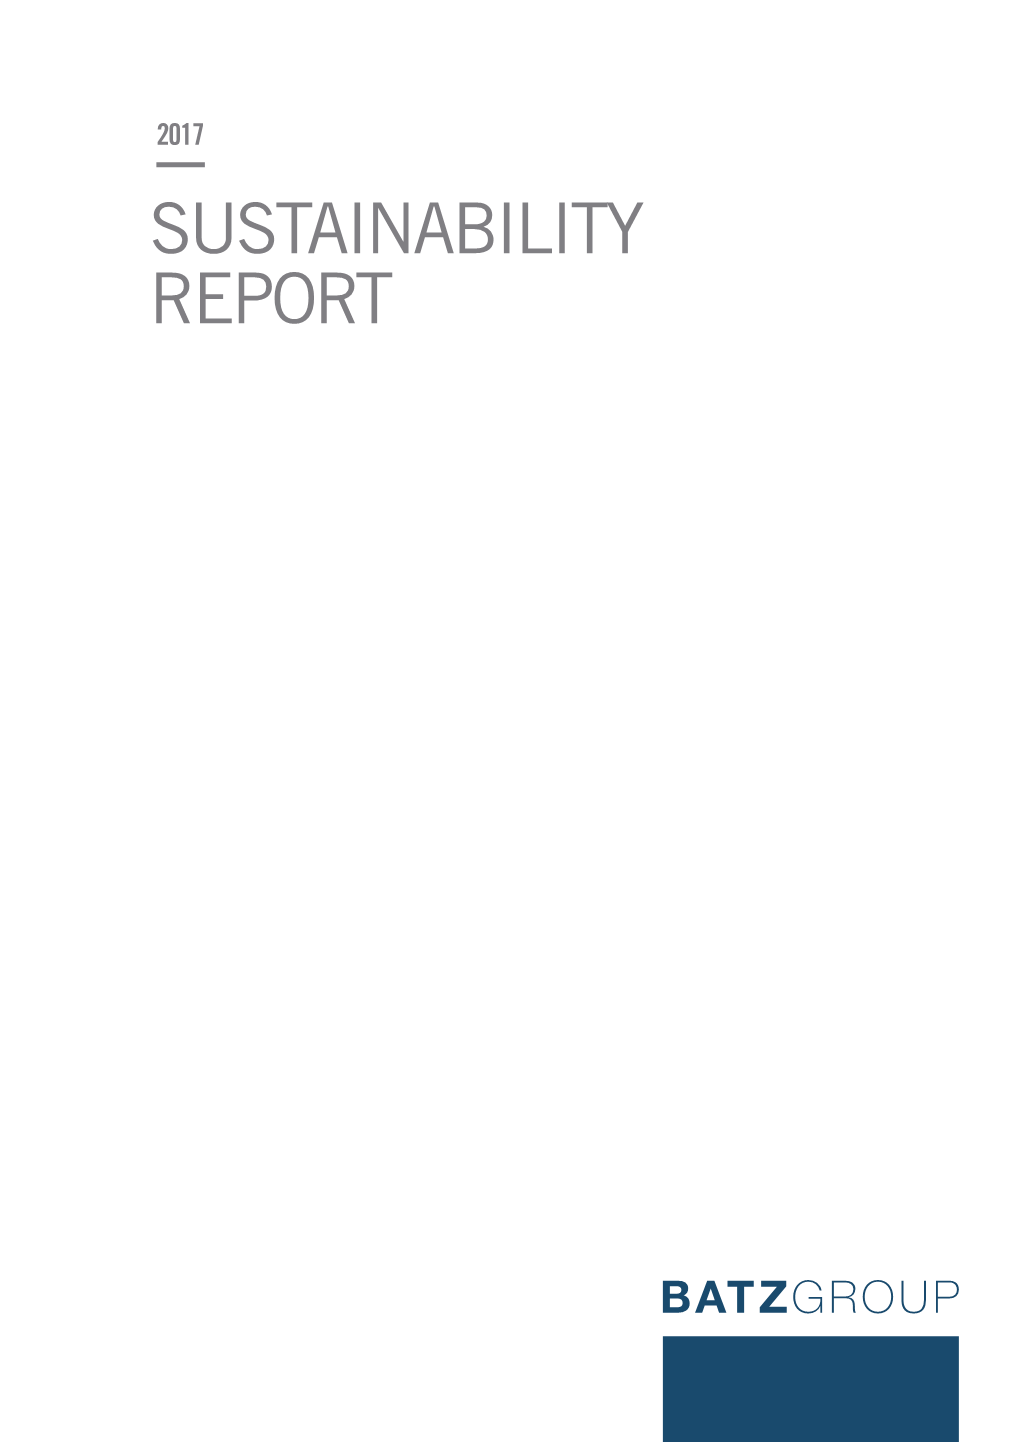 Sustainability Report Contents